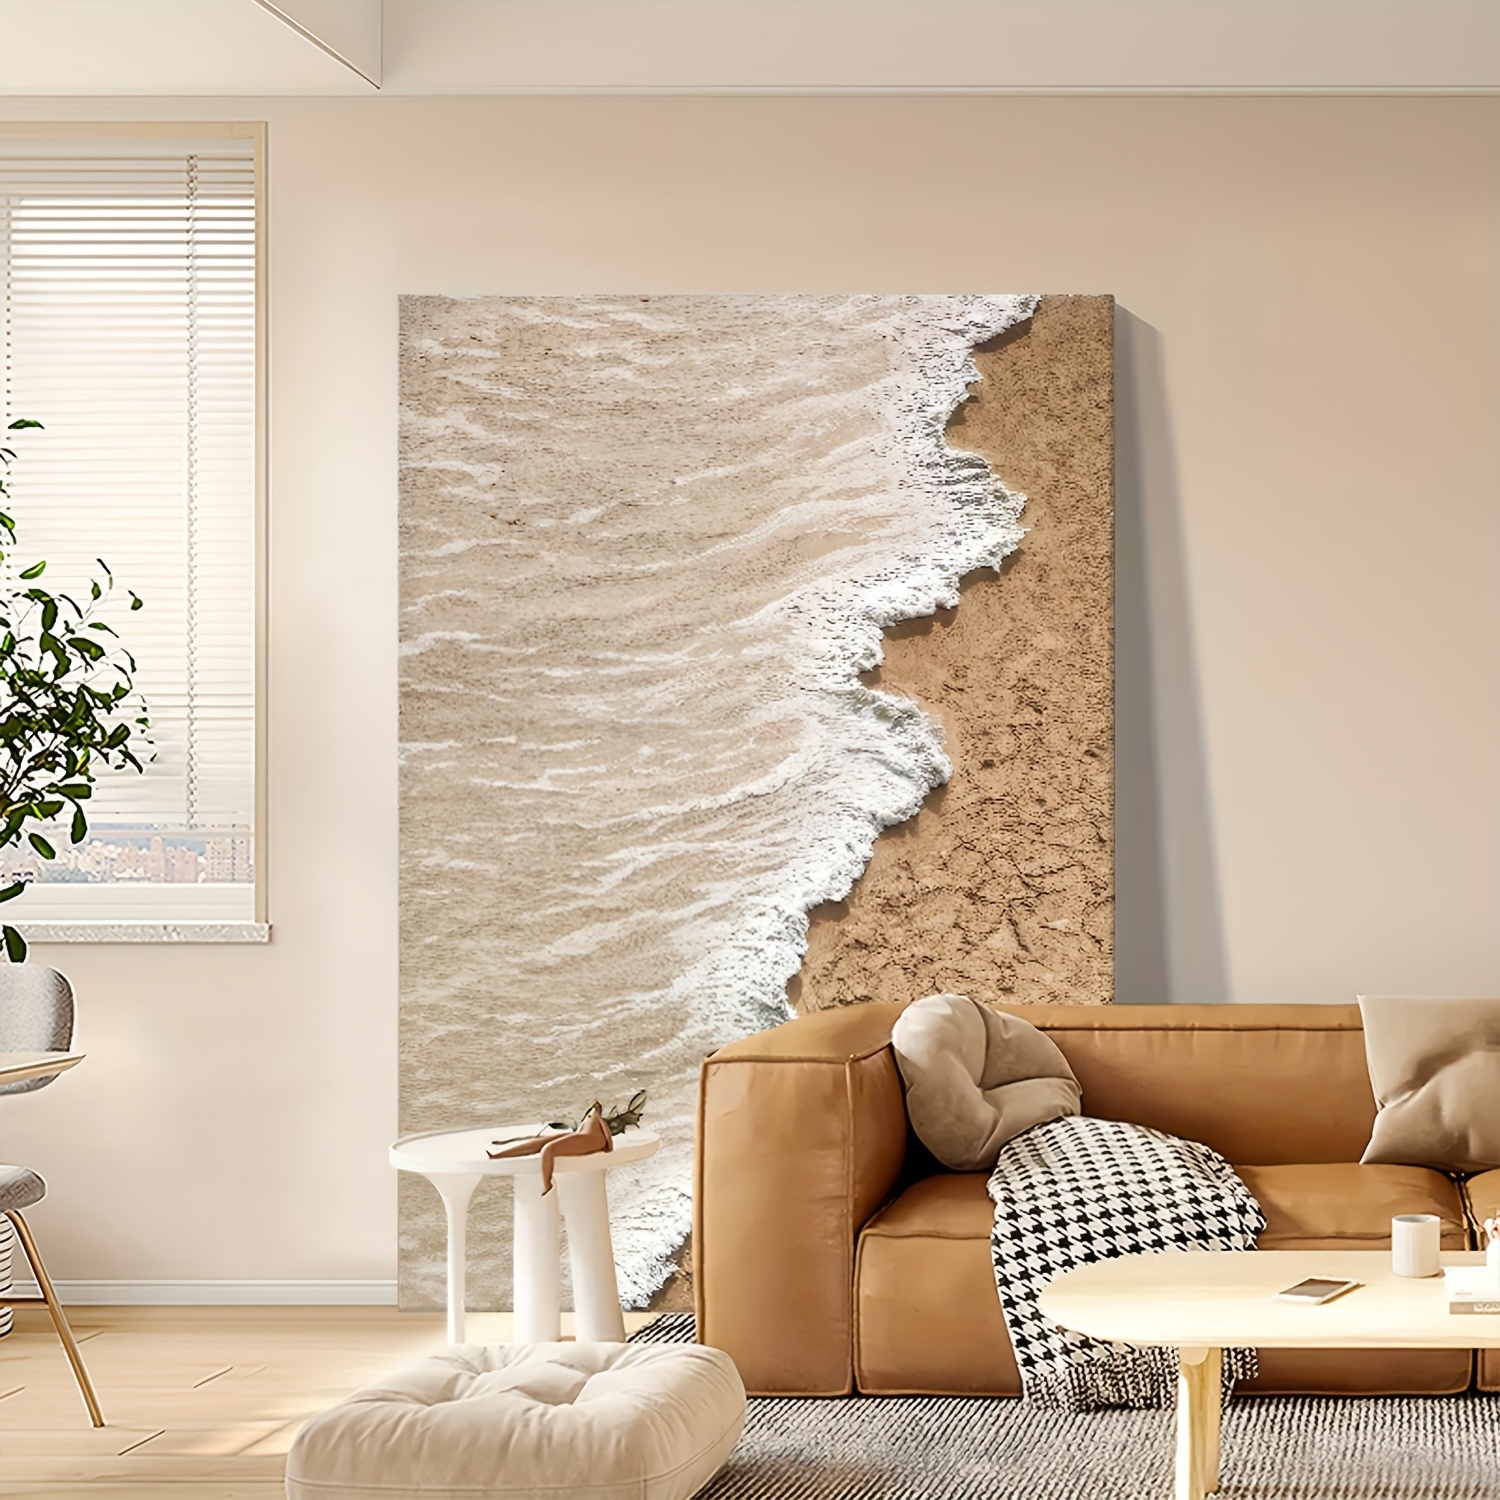 

breeze And Waves" - Minimalist Wabi-sabi Wall Art, Luxe Floor Painting For Modern Home Decor